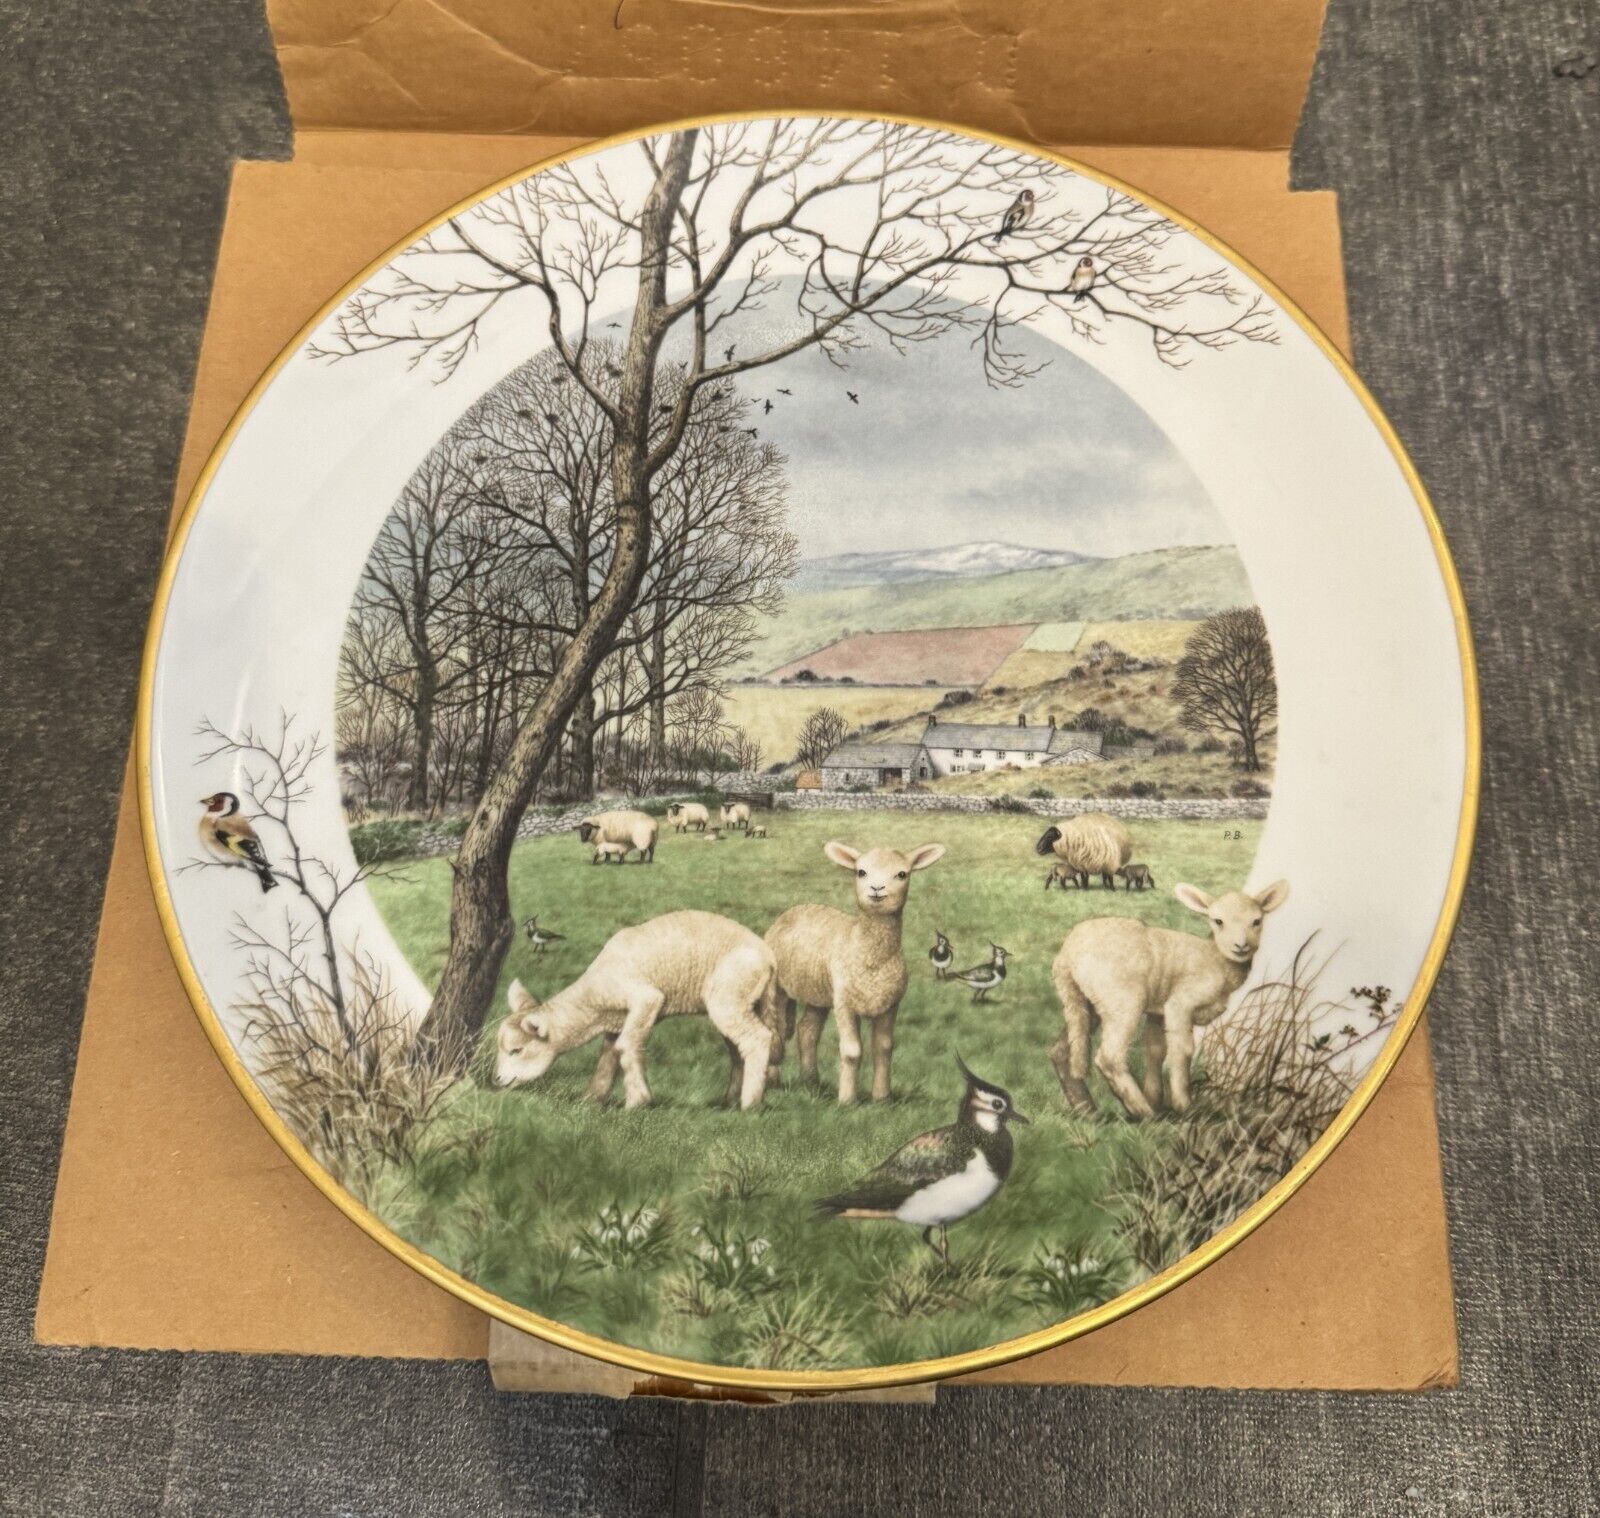 COLLECTOR PLATE BY PETER BANETT - JANUARY\'S LAMBING SEASON